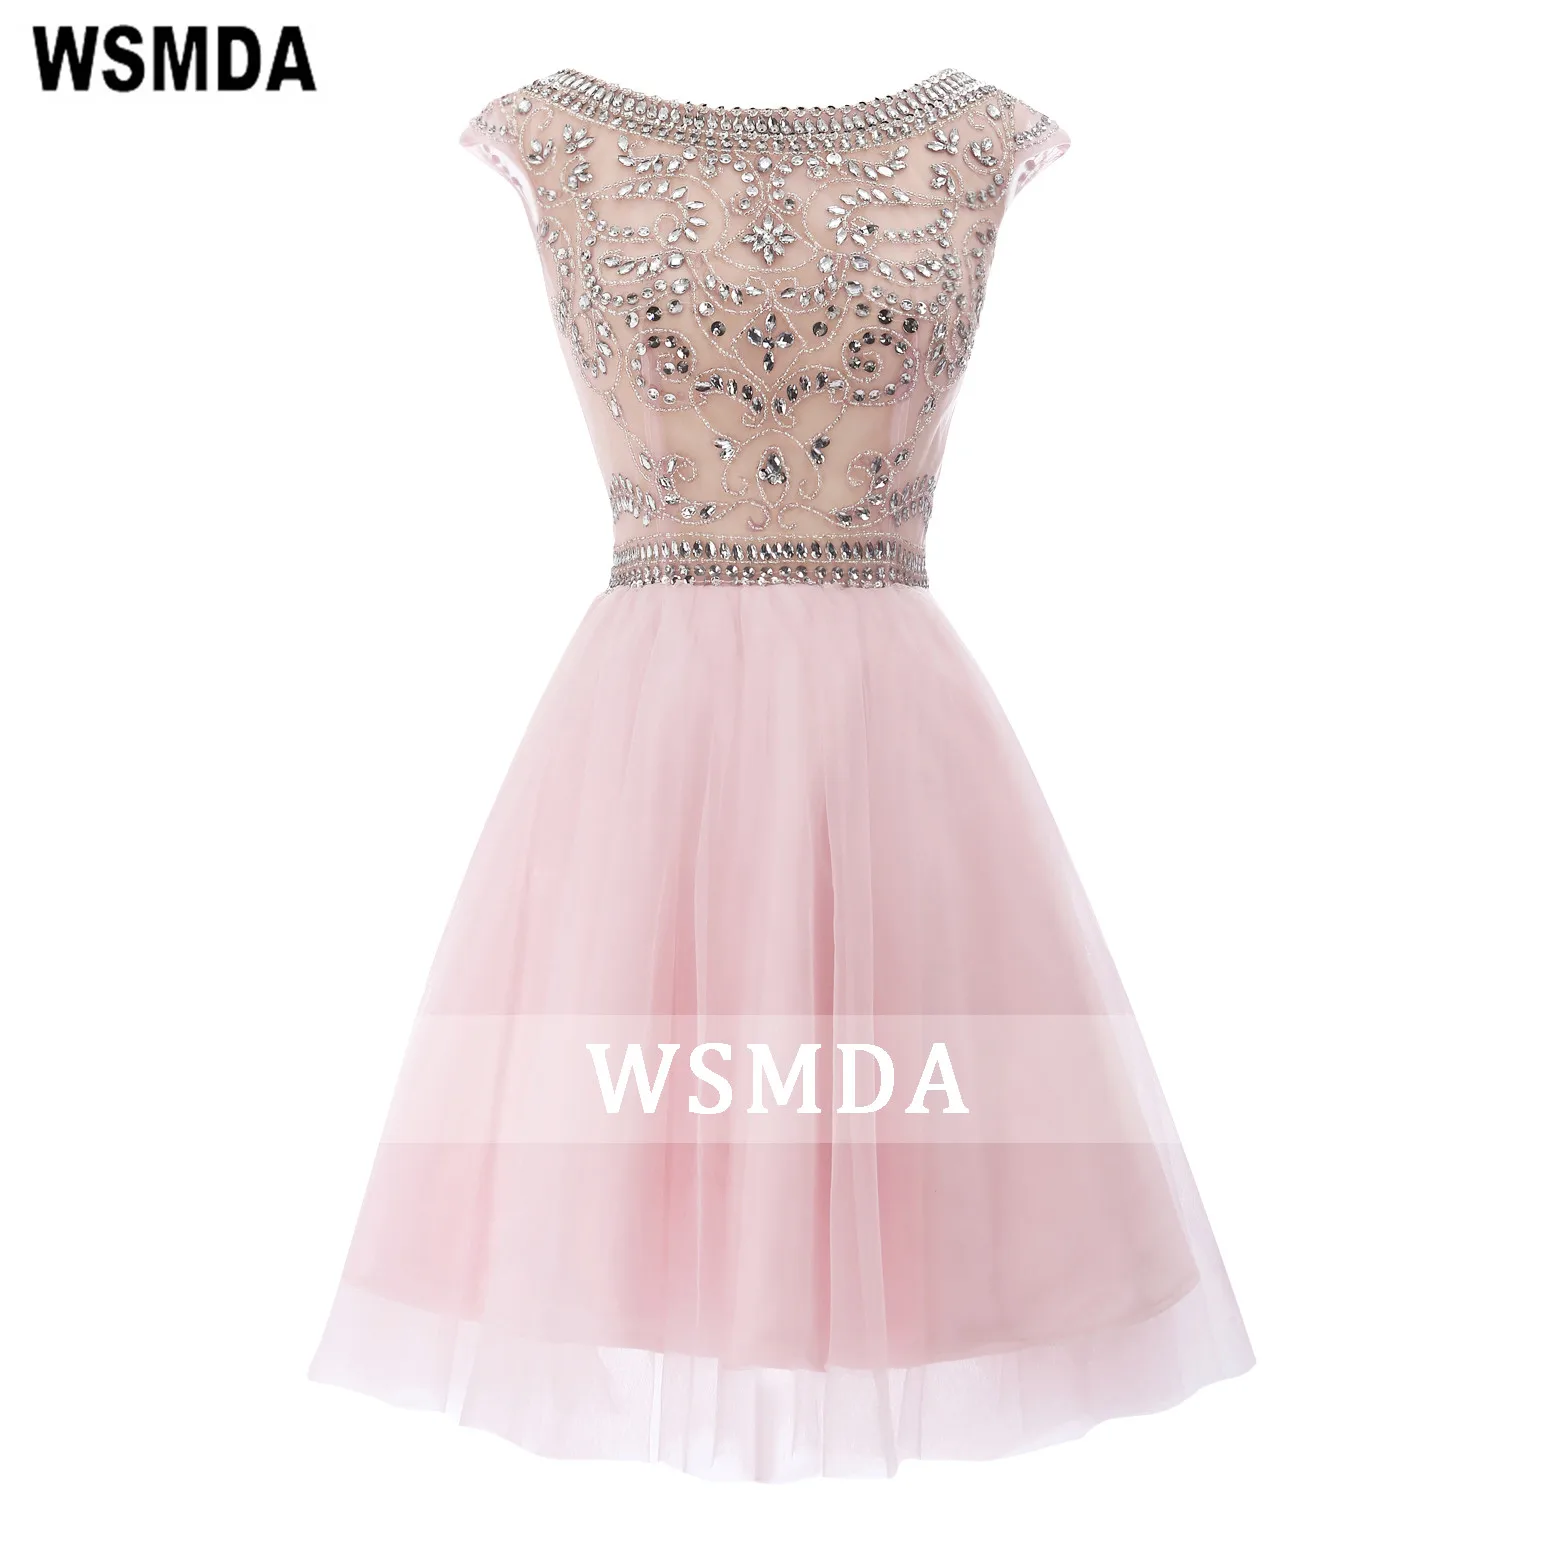 

Pink Rhinestones Beads Short Homecoming Dress Scoop Neck Capped Sleeves Zipper Mini Prom Party Gown Tulle Dress